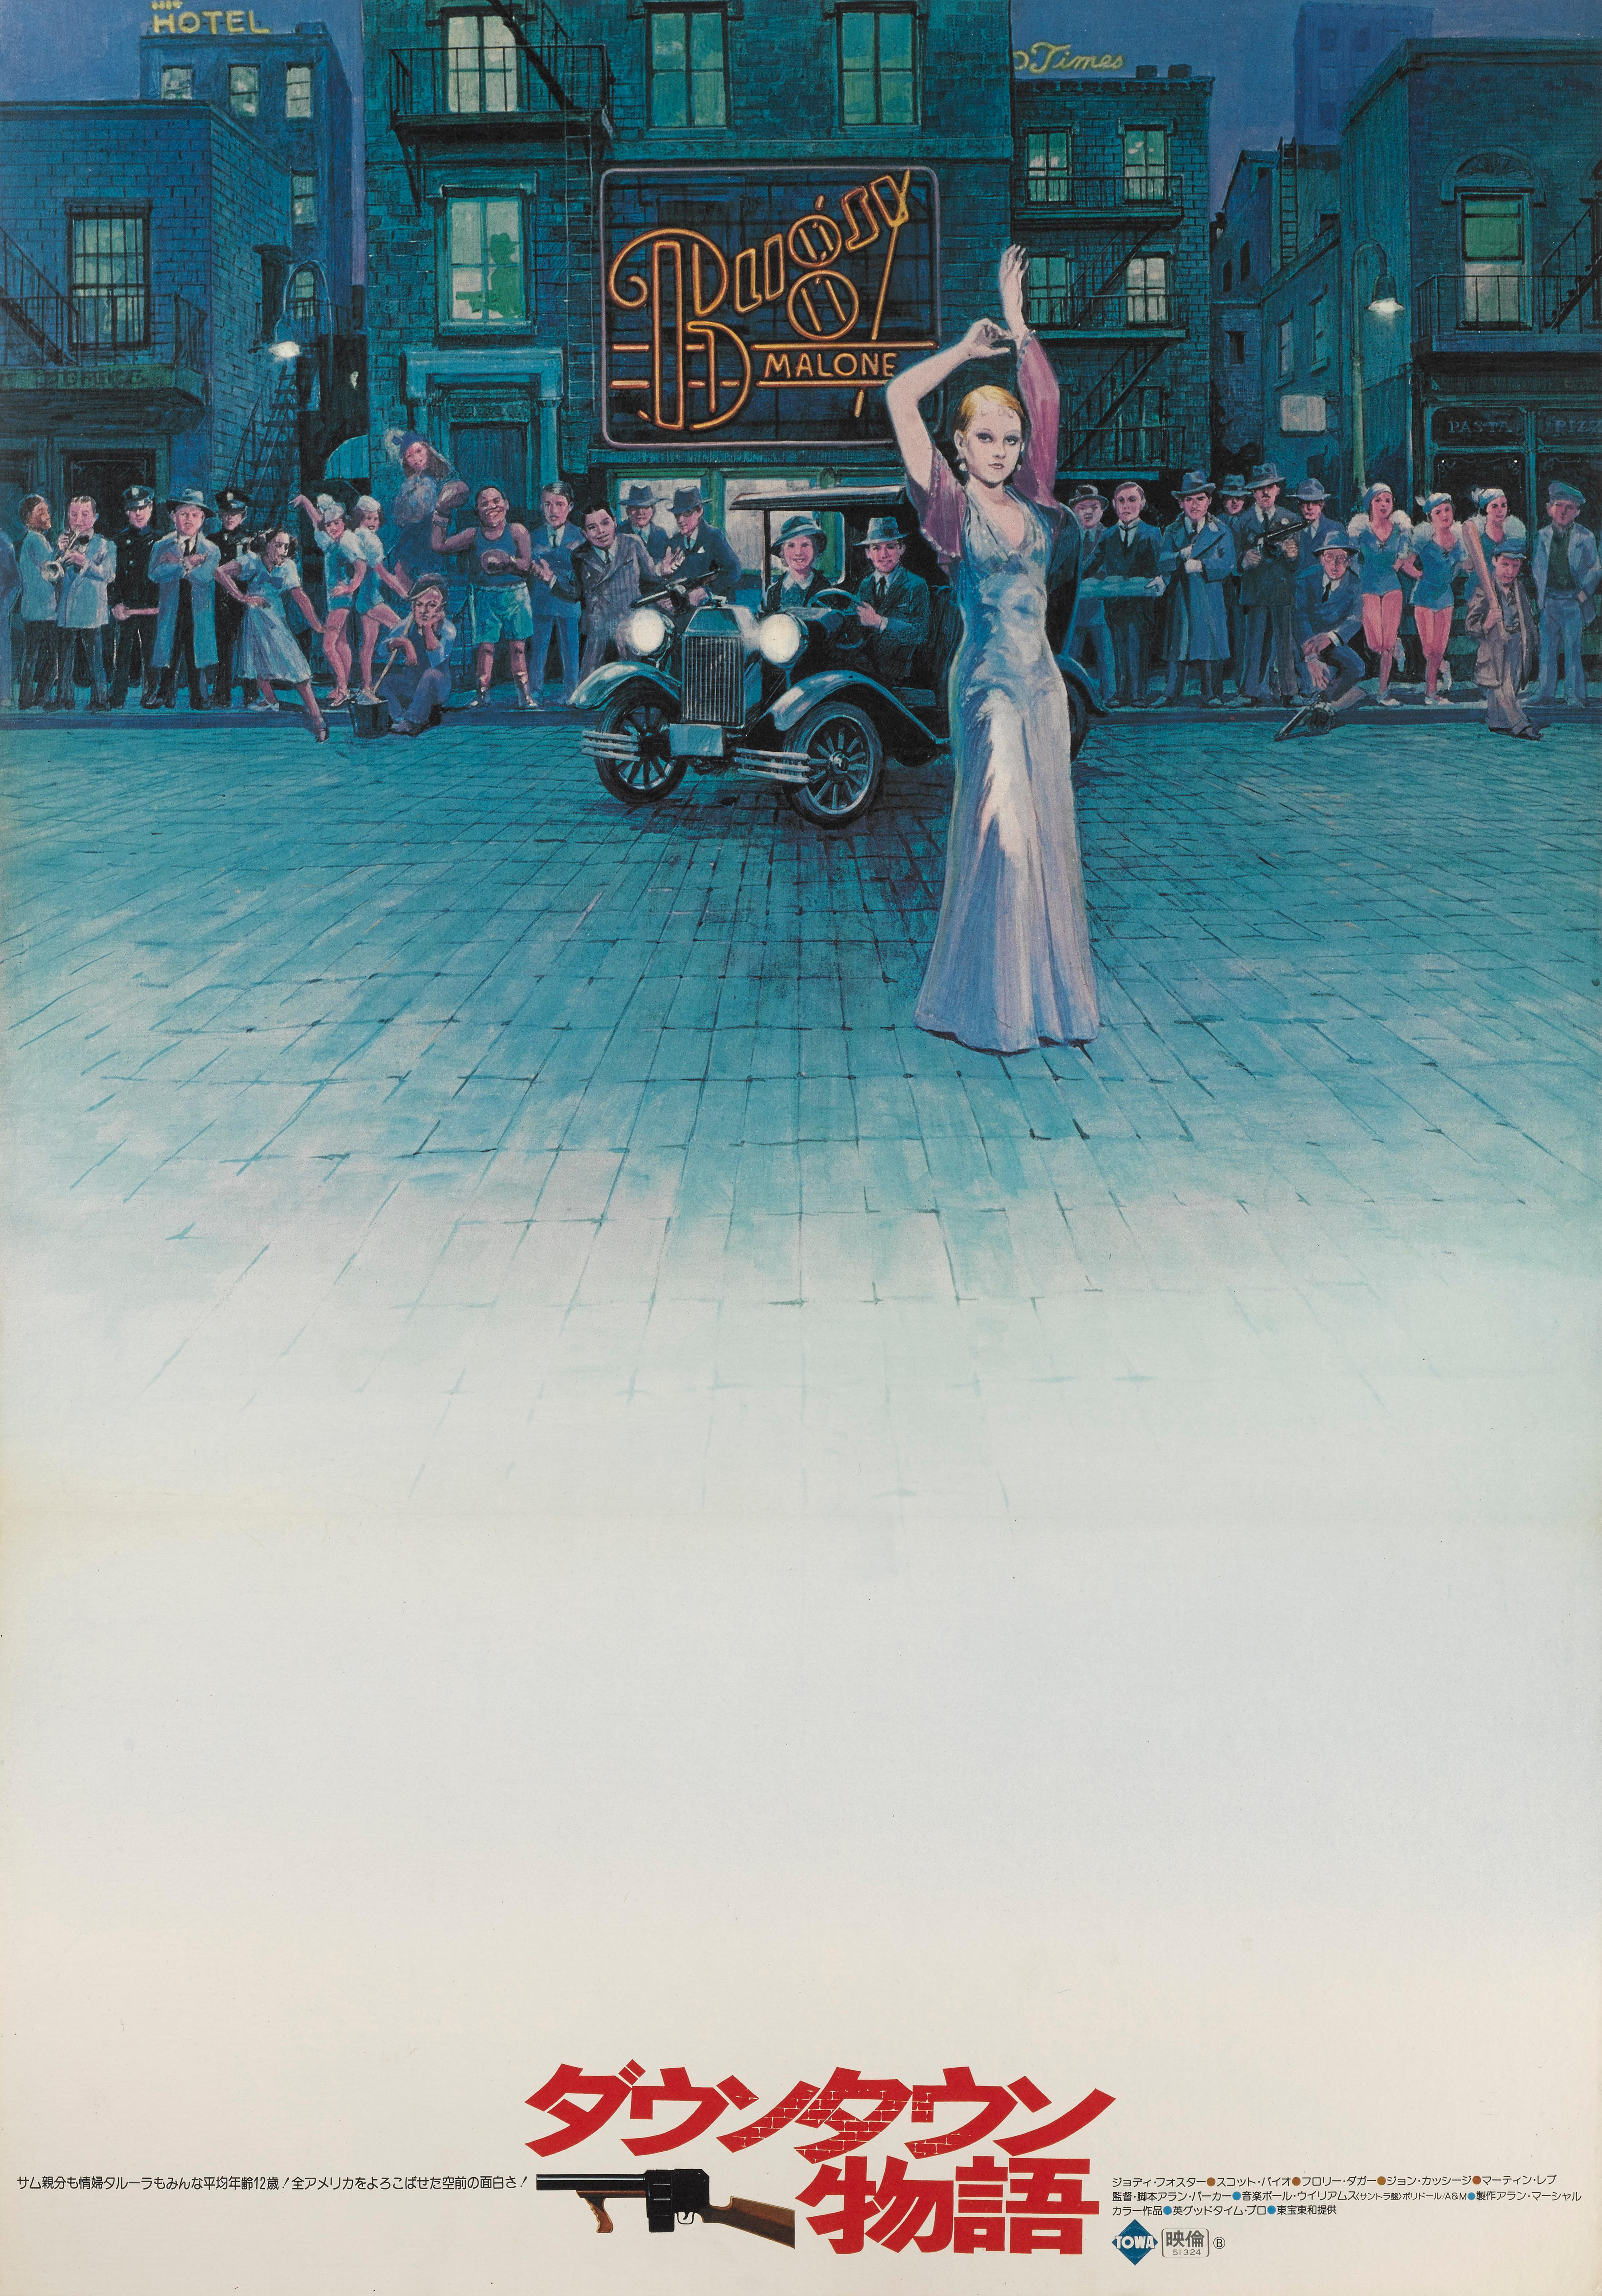 Original Japanese film poster from the 1976 Musical comedy Bugsy Malone.
The film was directed by Alan Parker and starred Scott Baio, Jodie Foster.
This poster is conservation linen backed and would be shipped rolled in a strong tube.